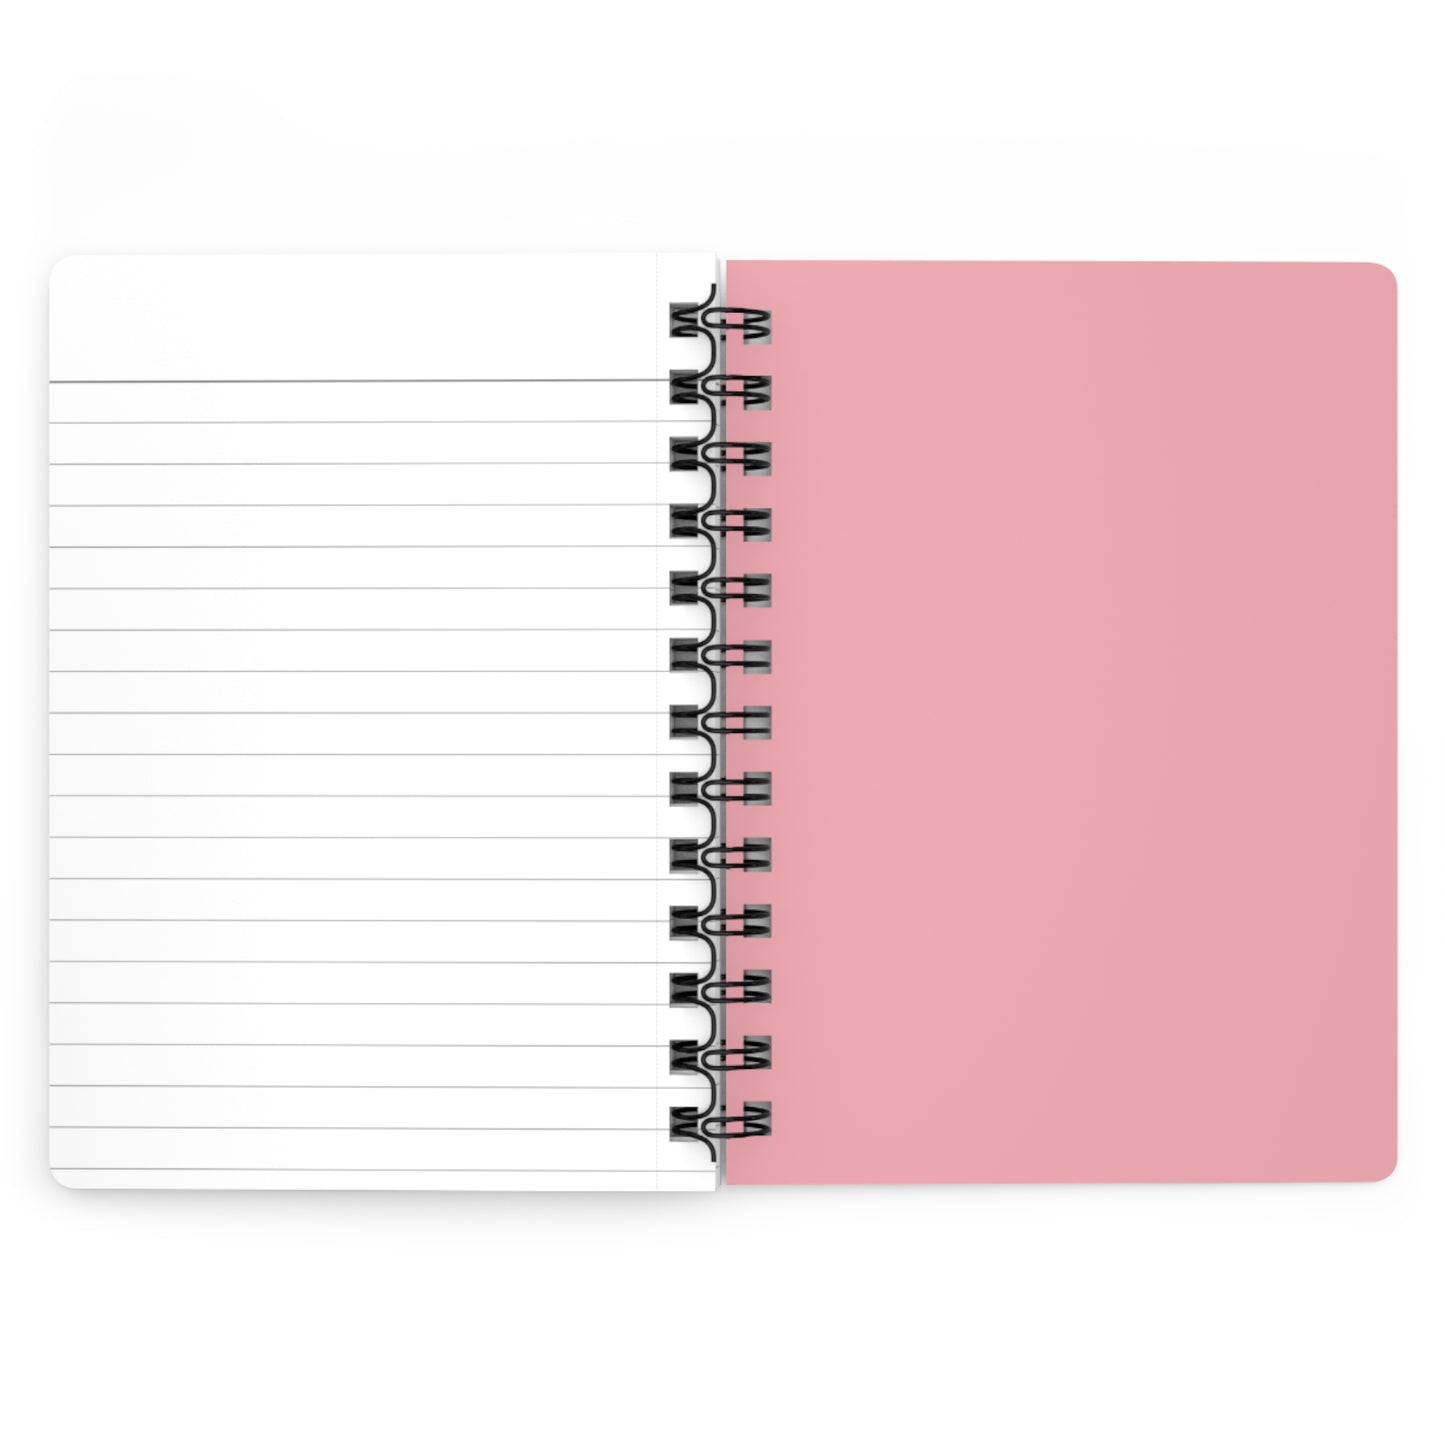 Cute Cat and Flowers Spiral Bound Journal